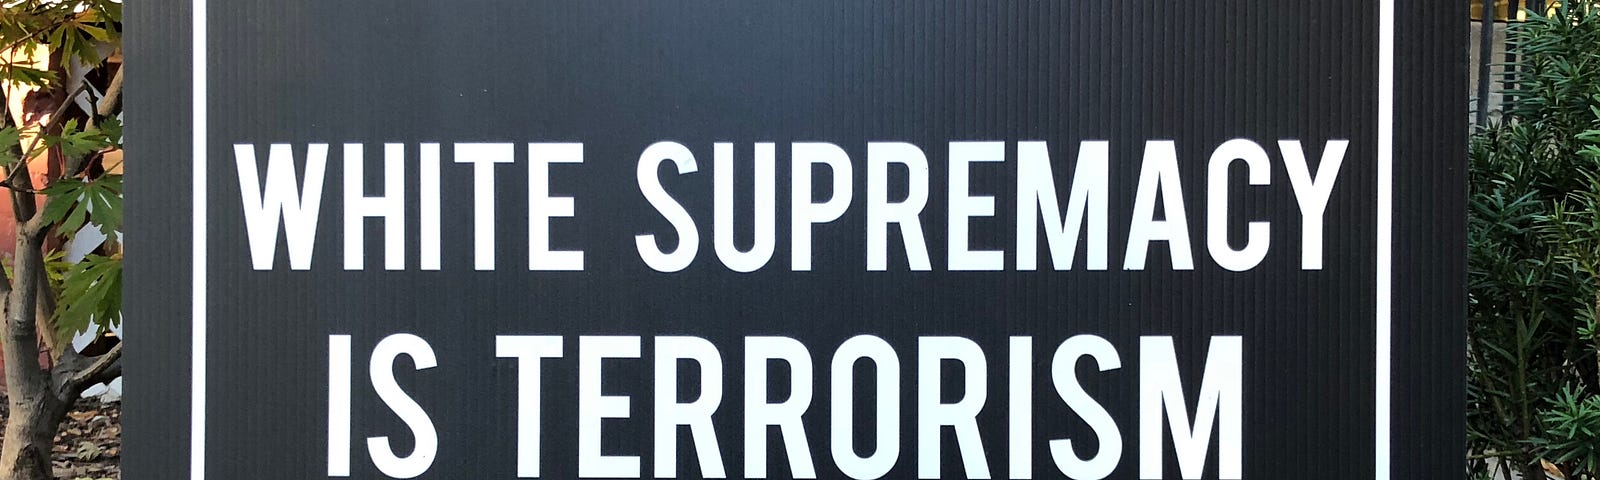 Lawn sign, white text on black background, that says “White Supremacy is Terrorism” in all caps.